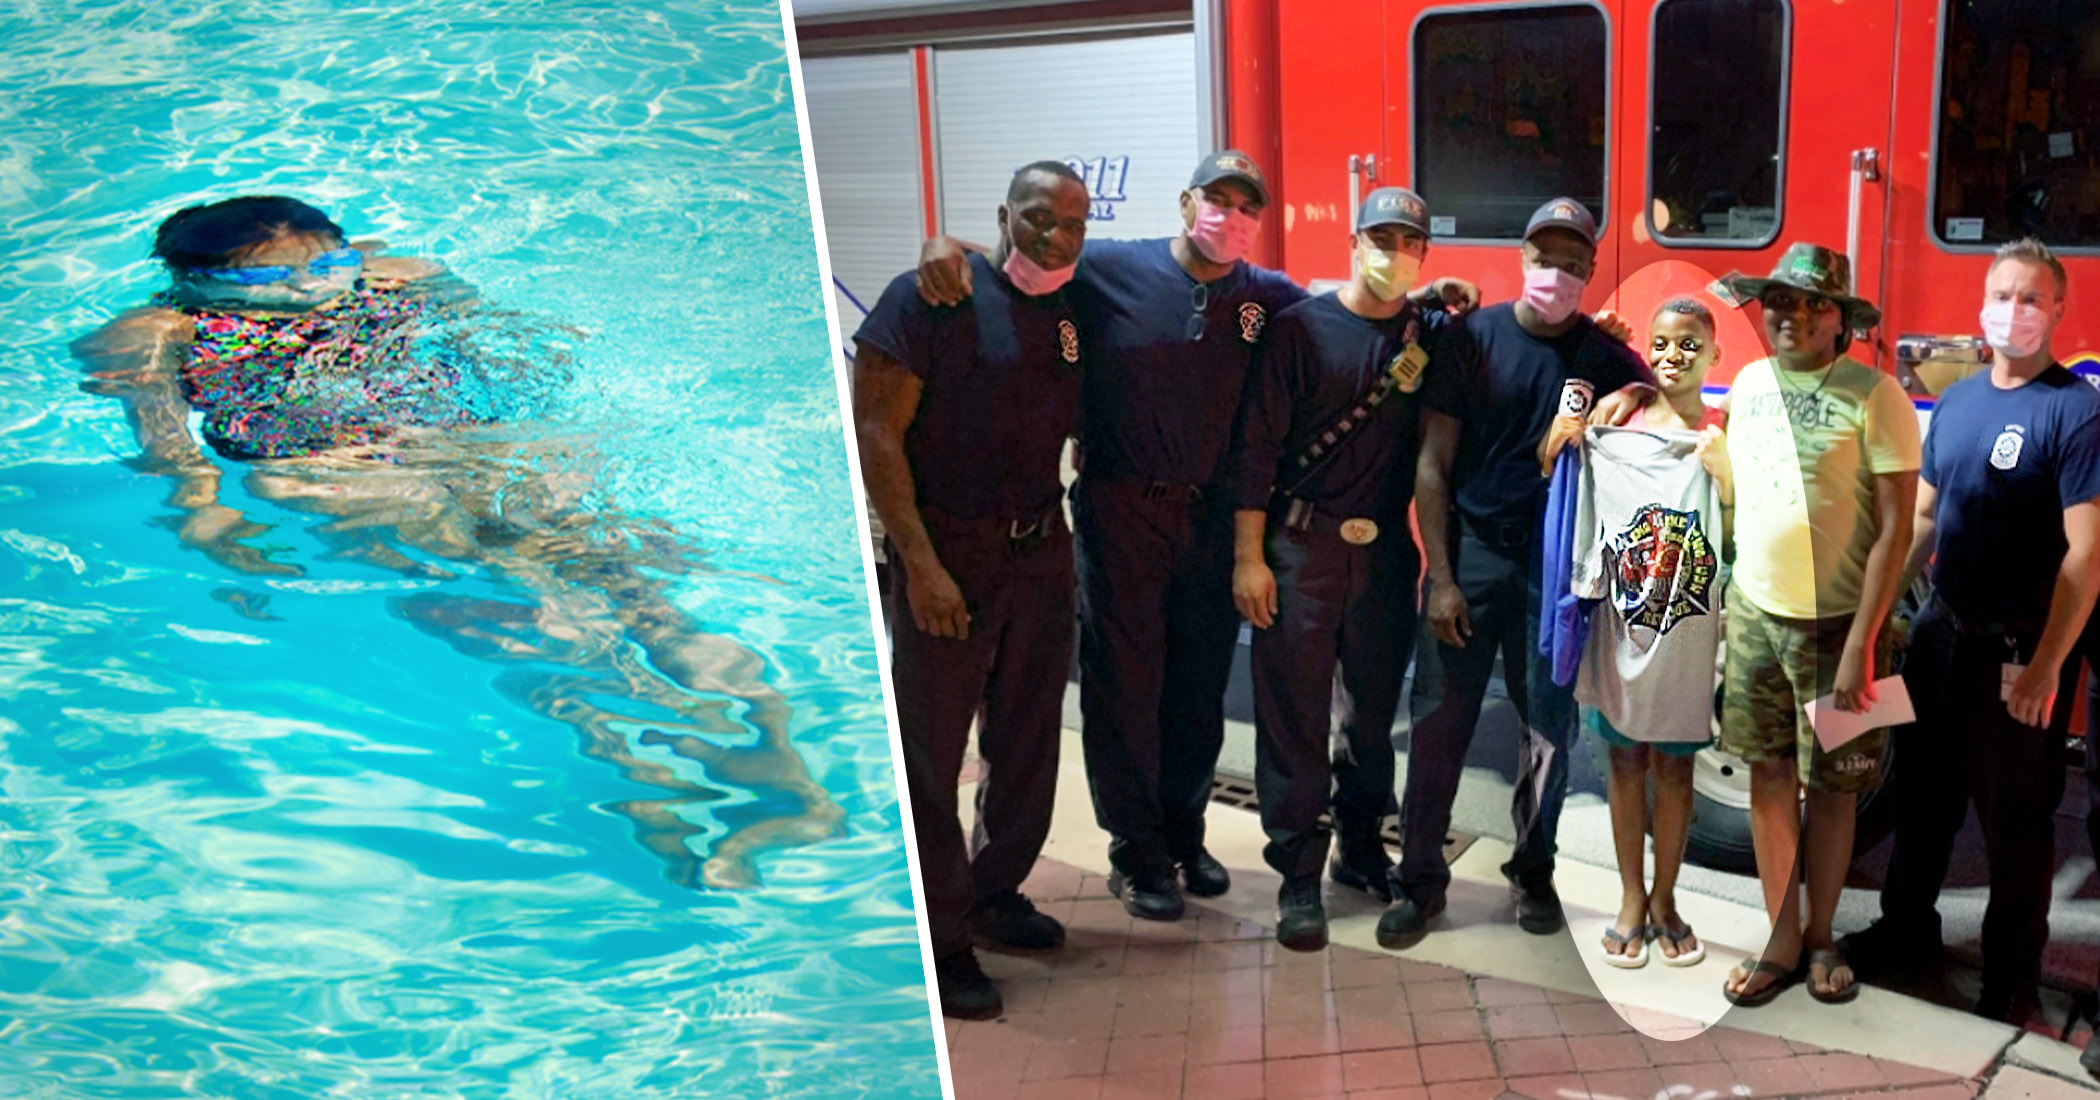 Year Old Babe Spots Woman Drowning In Florida Hotel Swimming Pool Leaps To Her Rescue